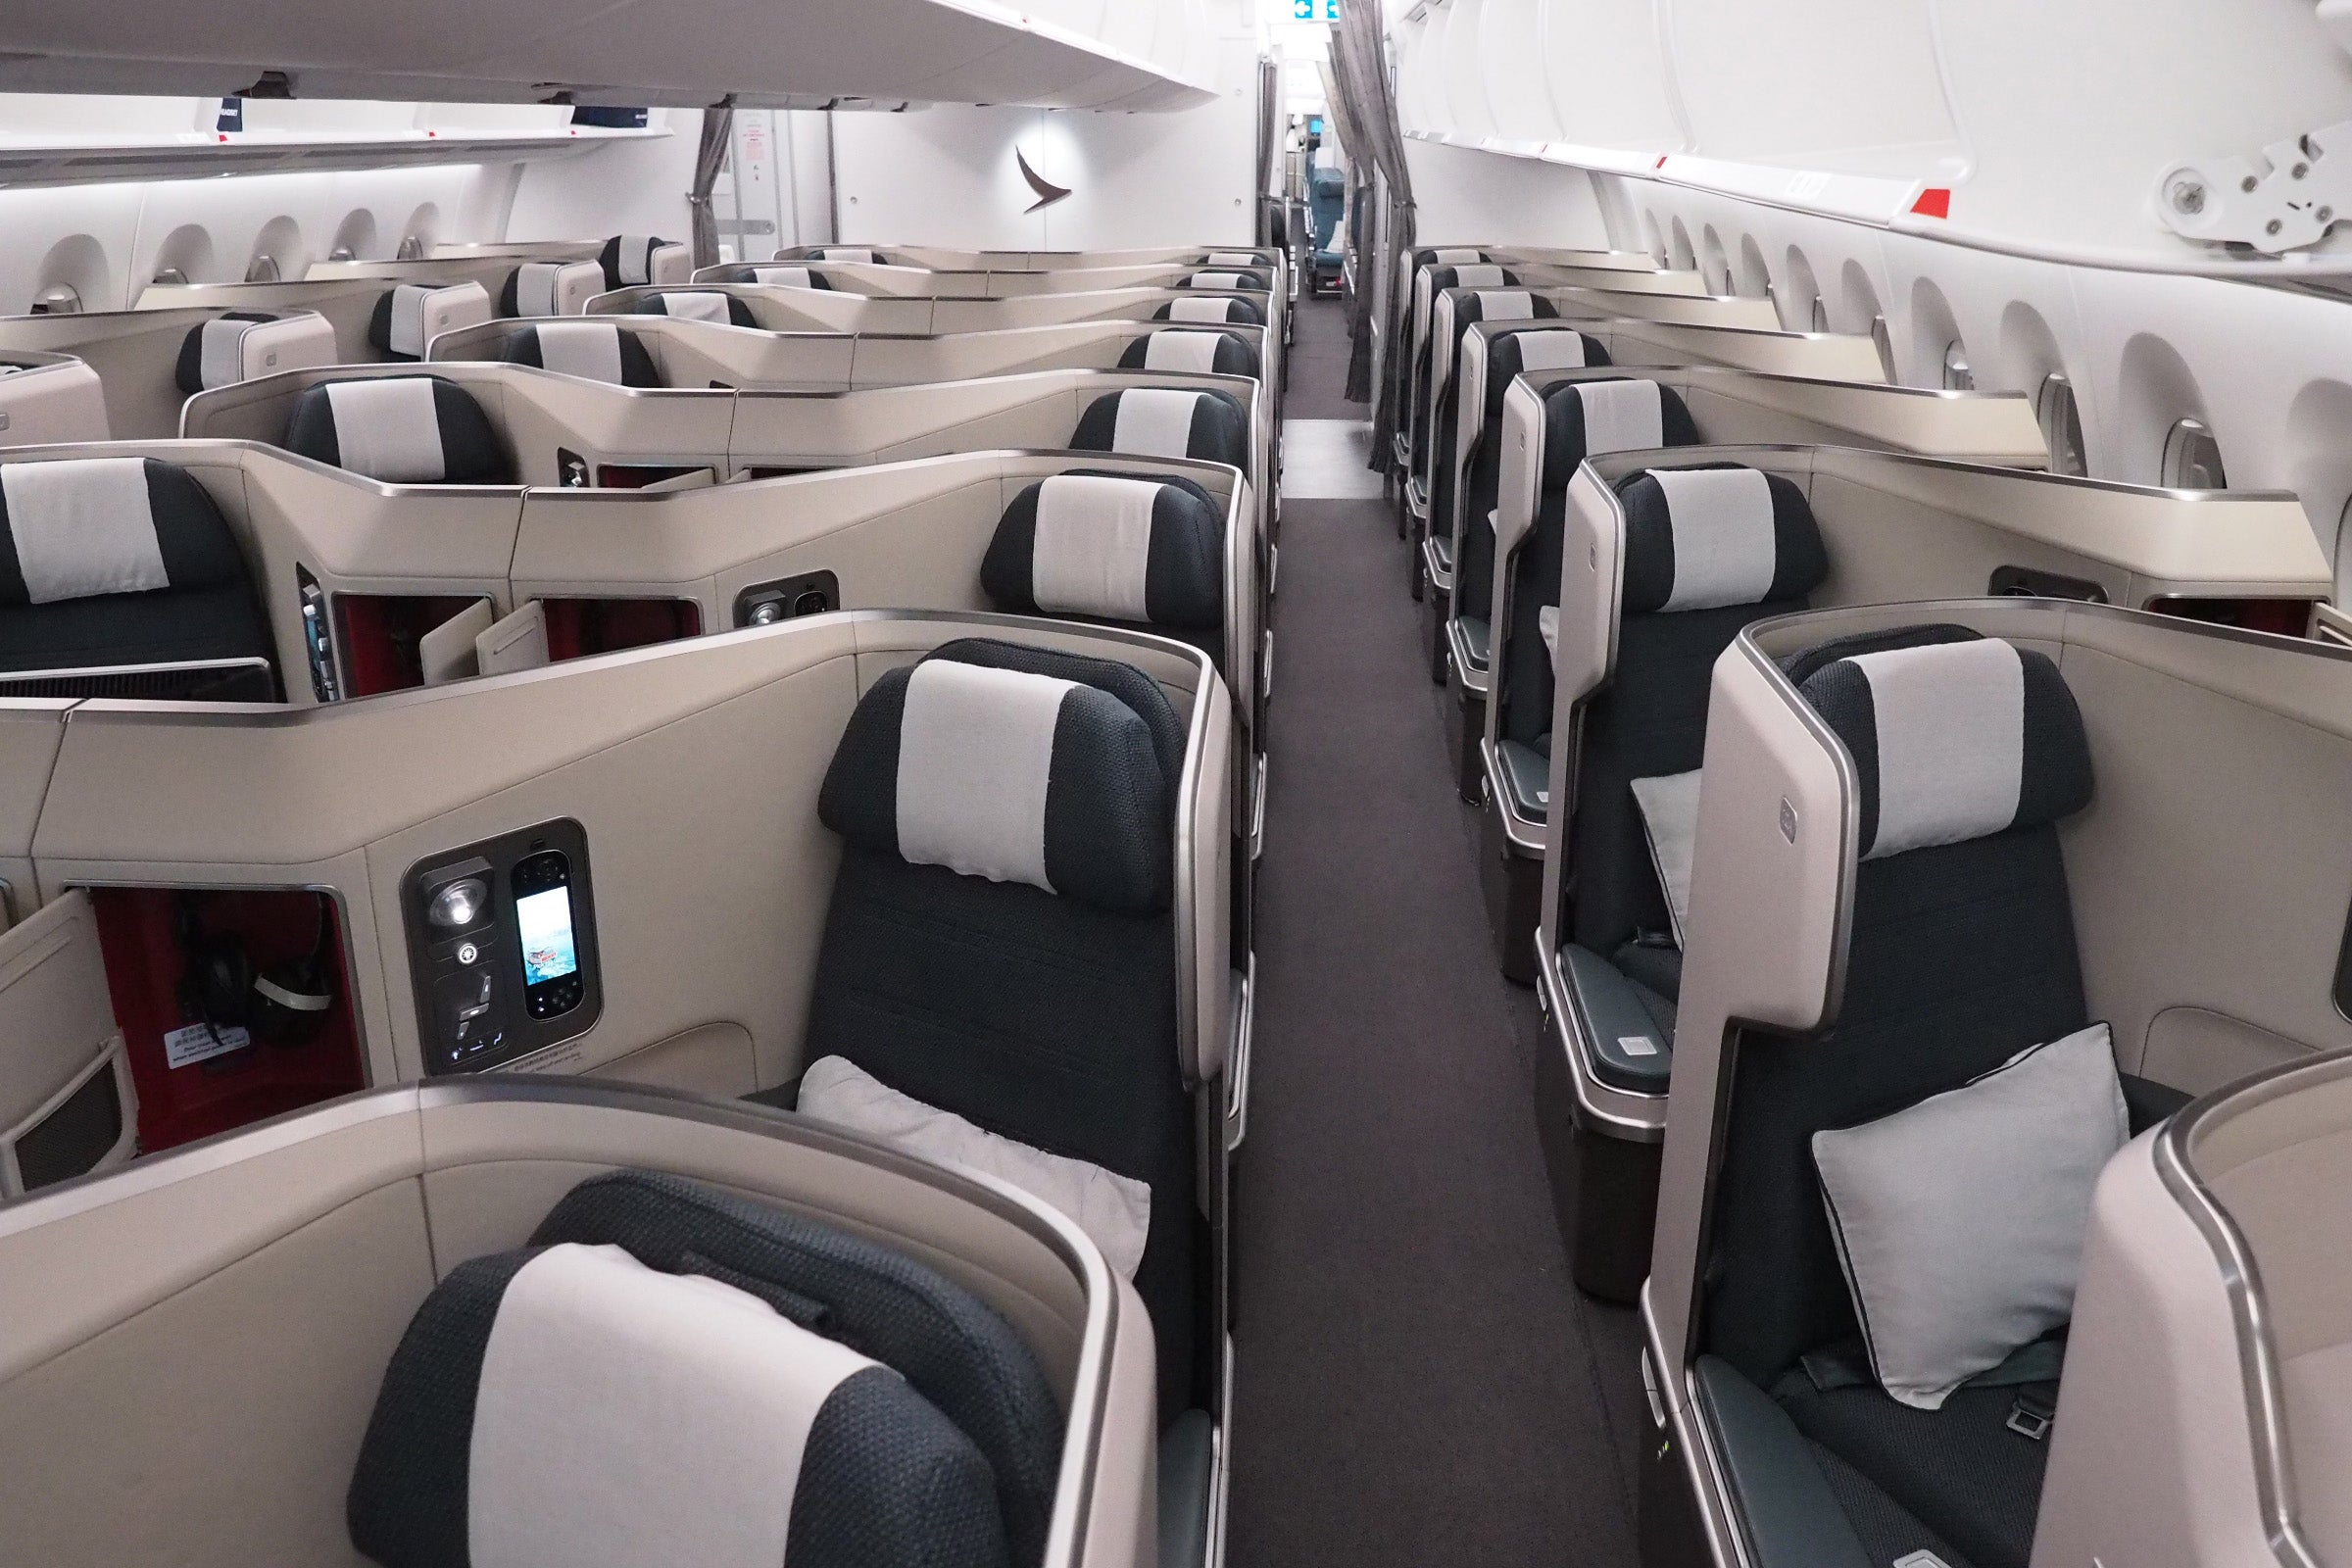 Cathay Pacific A350 Business Class review